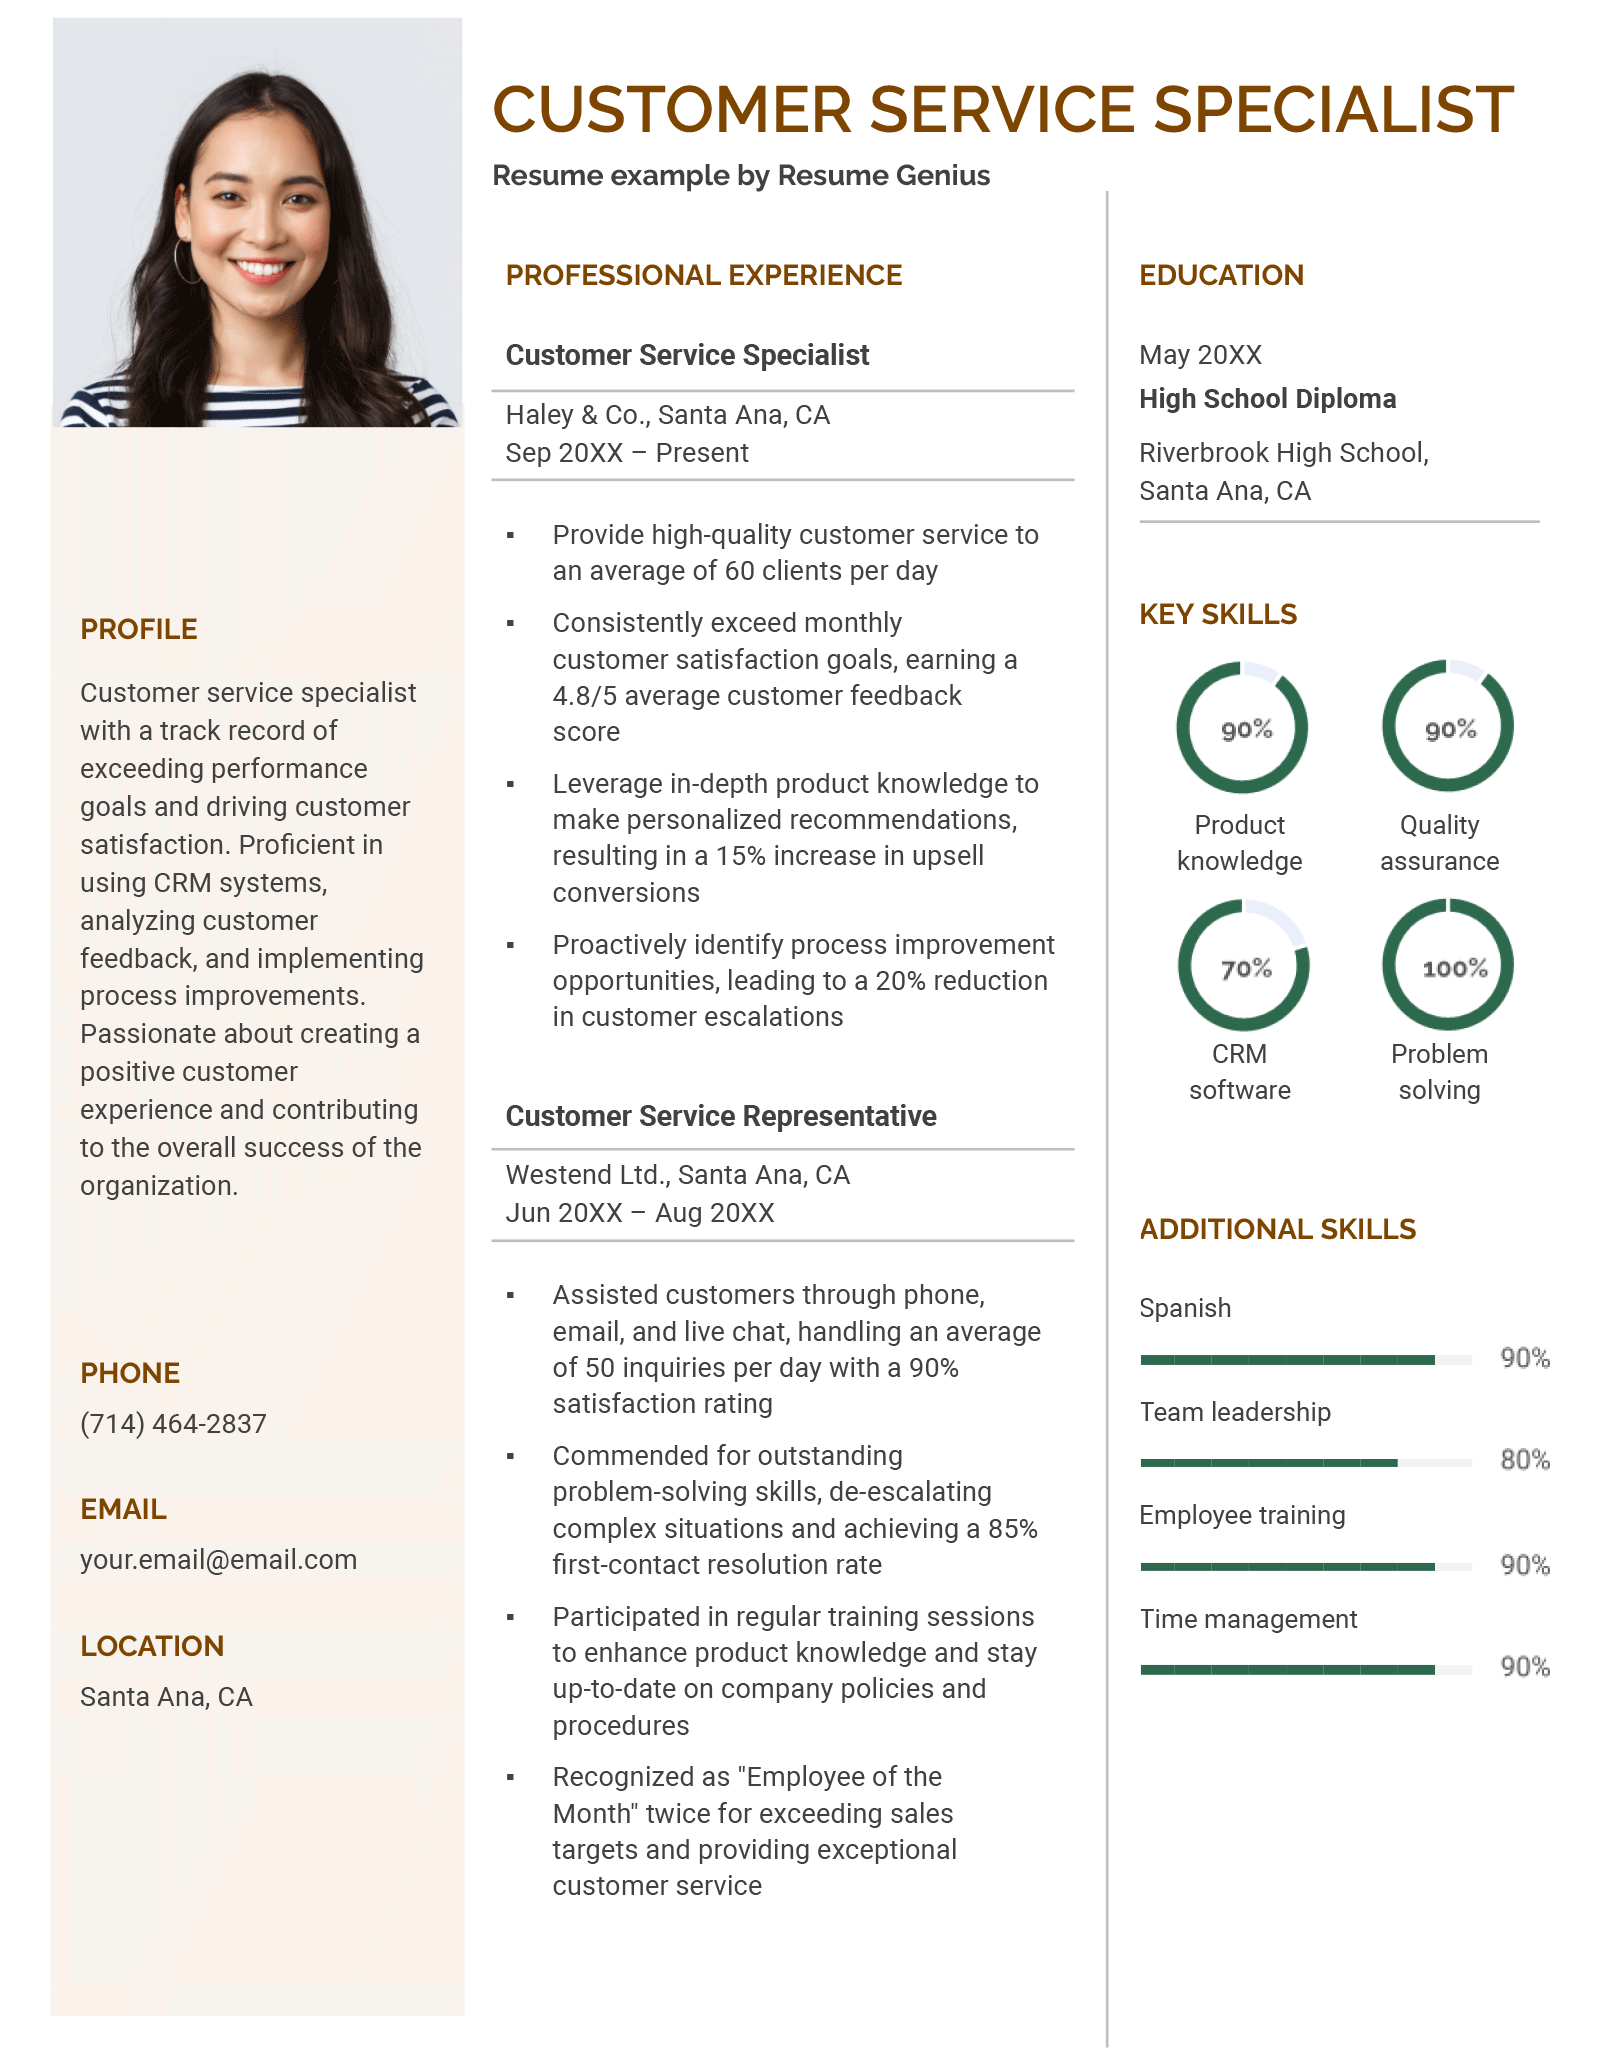 An example resume for a customer service specialist. 